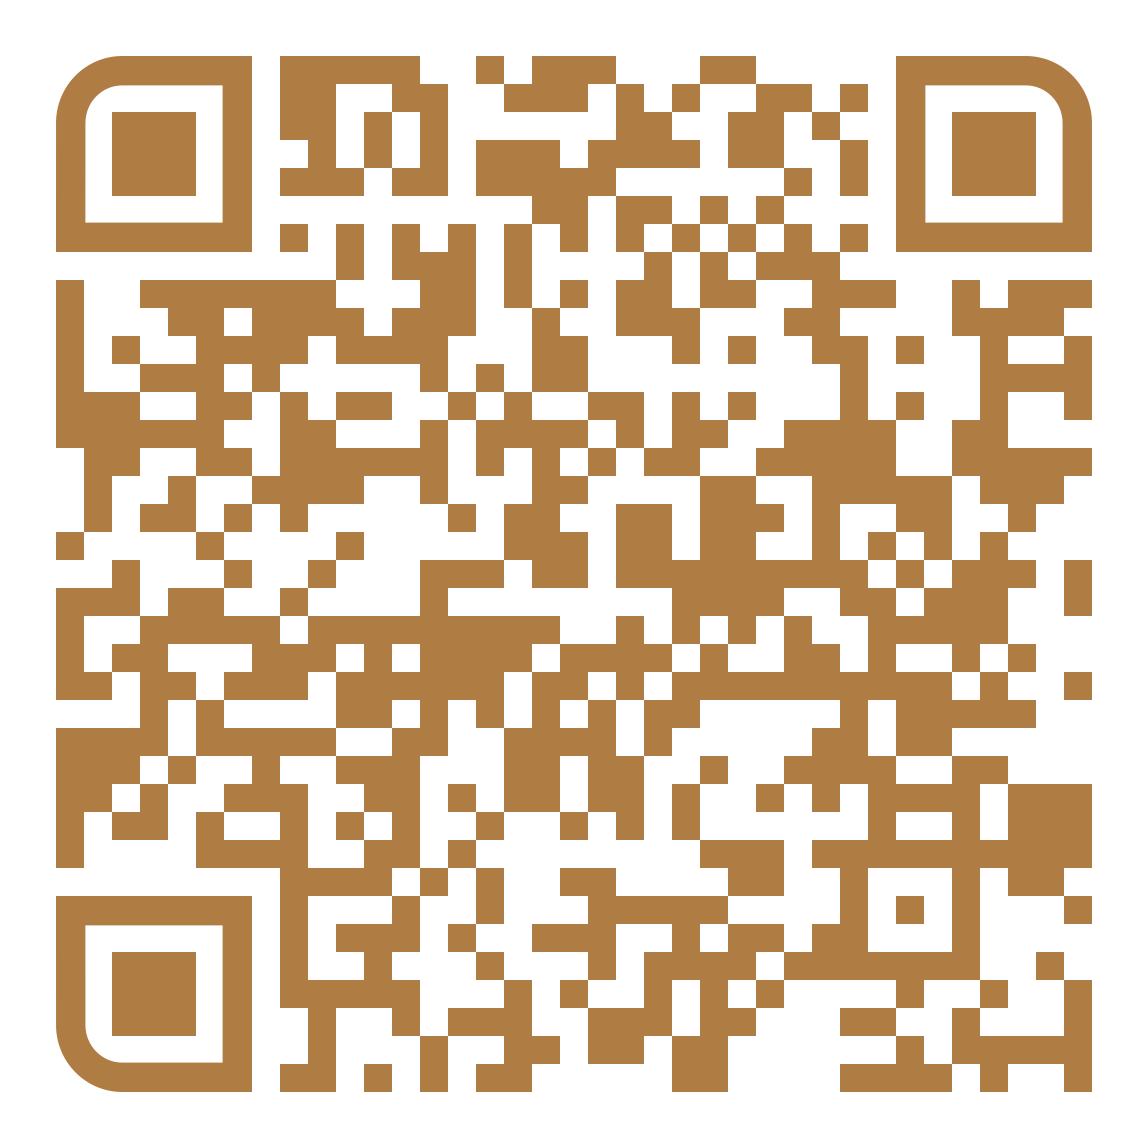 ChanganNoodleBar-AtelierBoter-qr-code.png